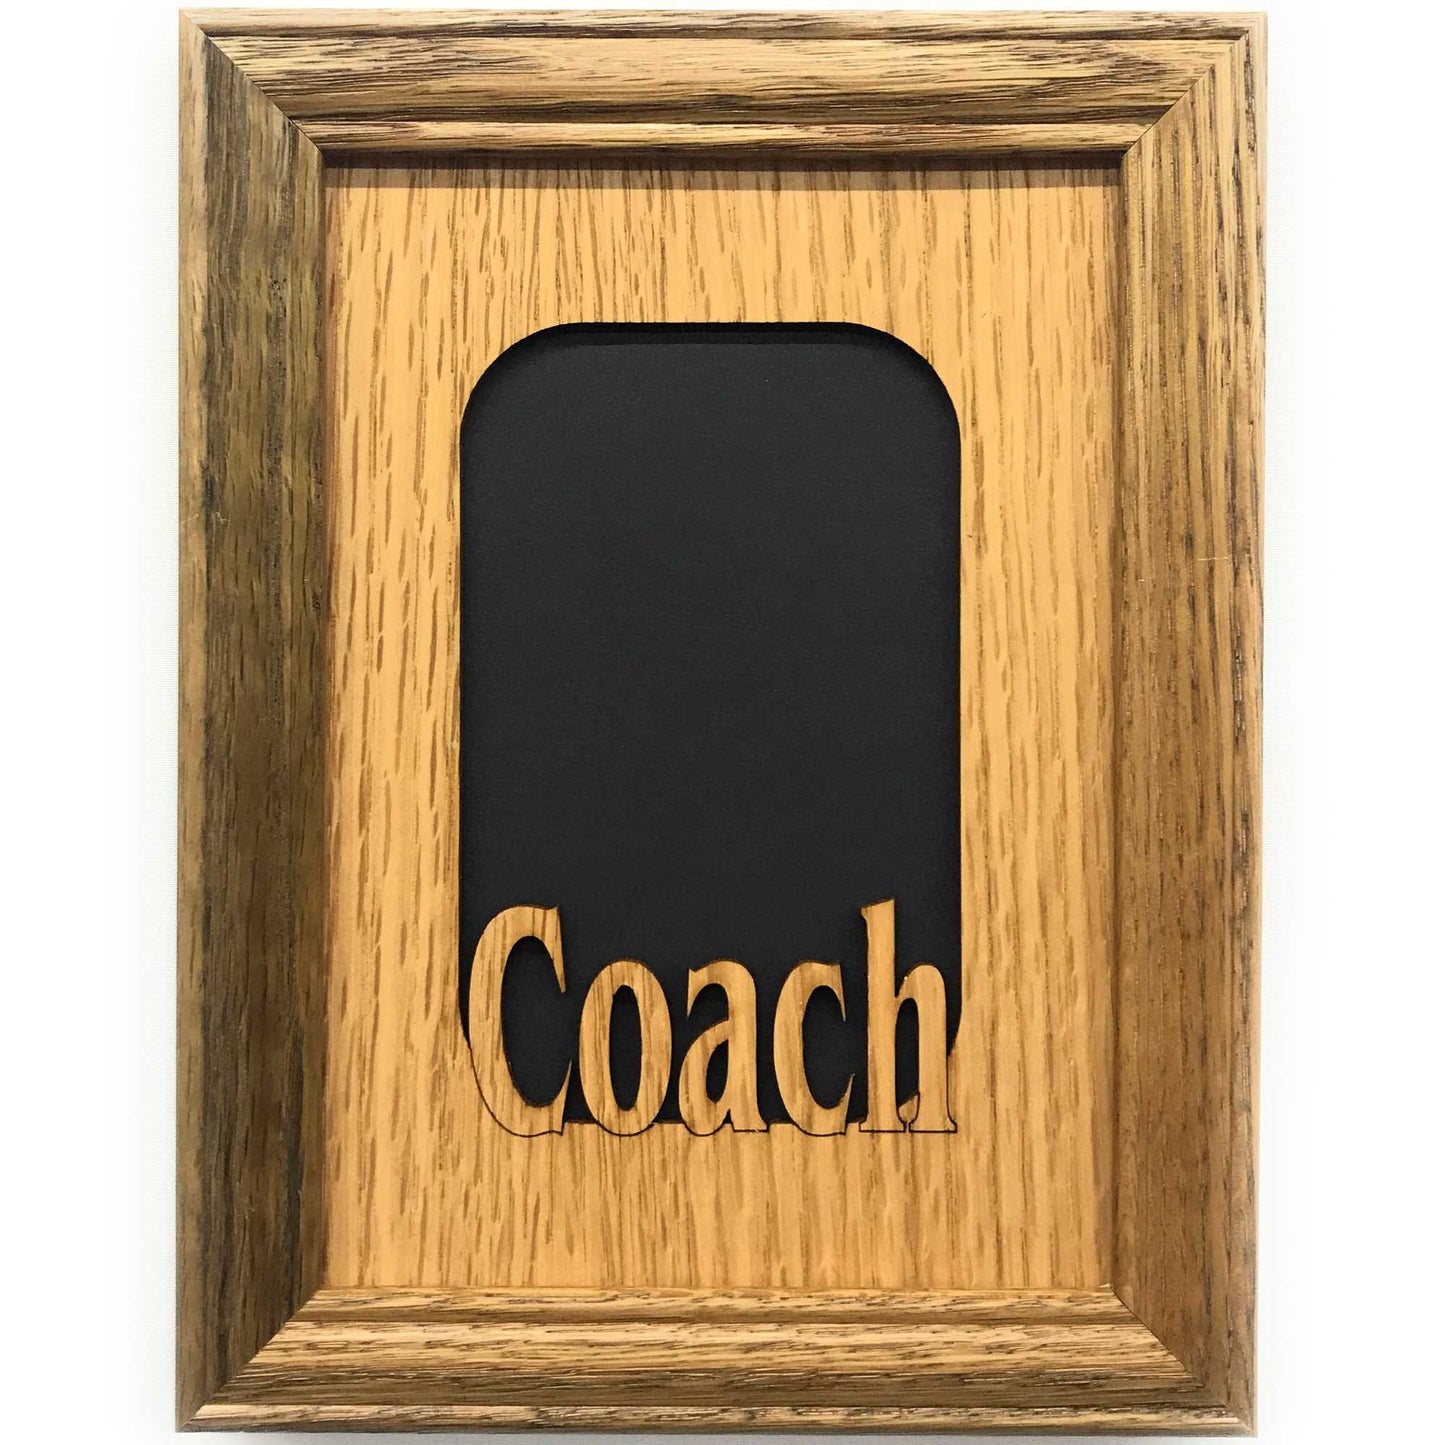 Coach Picture Frame - 5x7 Frame Holds 3x5 Photo